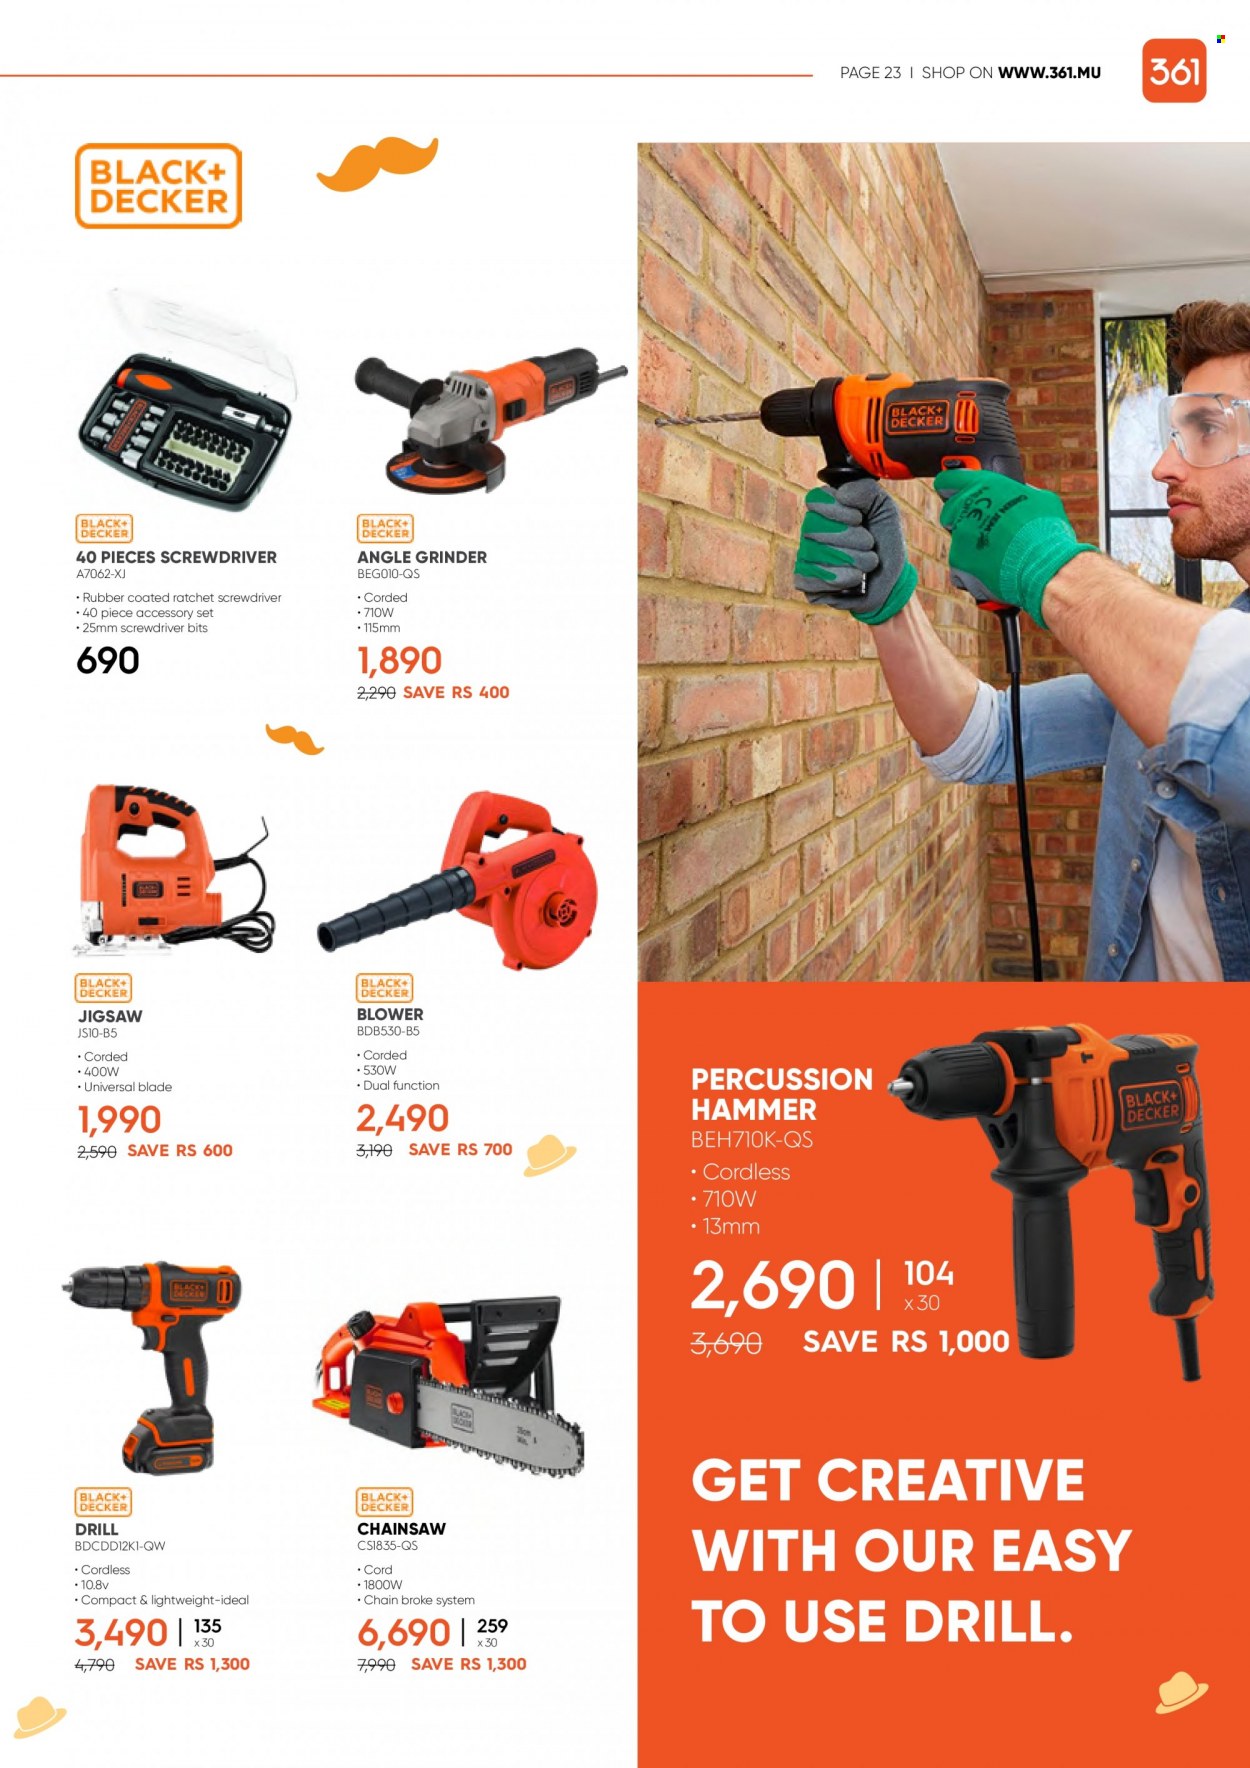 thumbnail - 361 Catalogue - 14.06.2022 - 23.06.2022 - Sales products - Black & Decker, grinder, percussion instrument, drill, hammer, chain saw, angle grinder, screwdriver bits. Page 23.